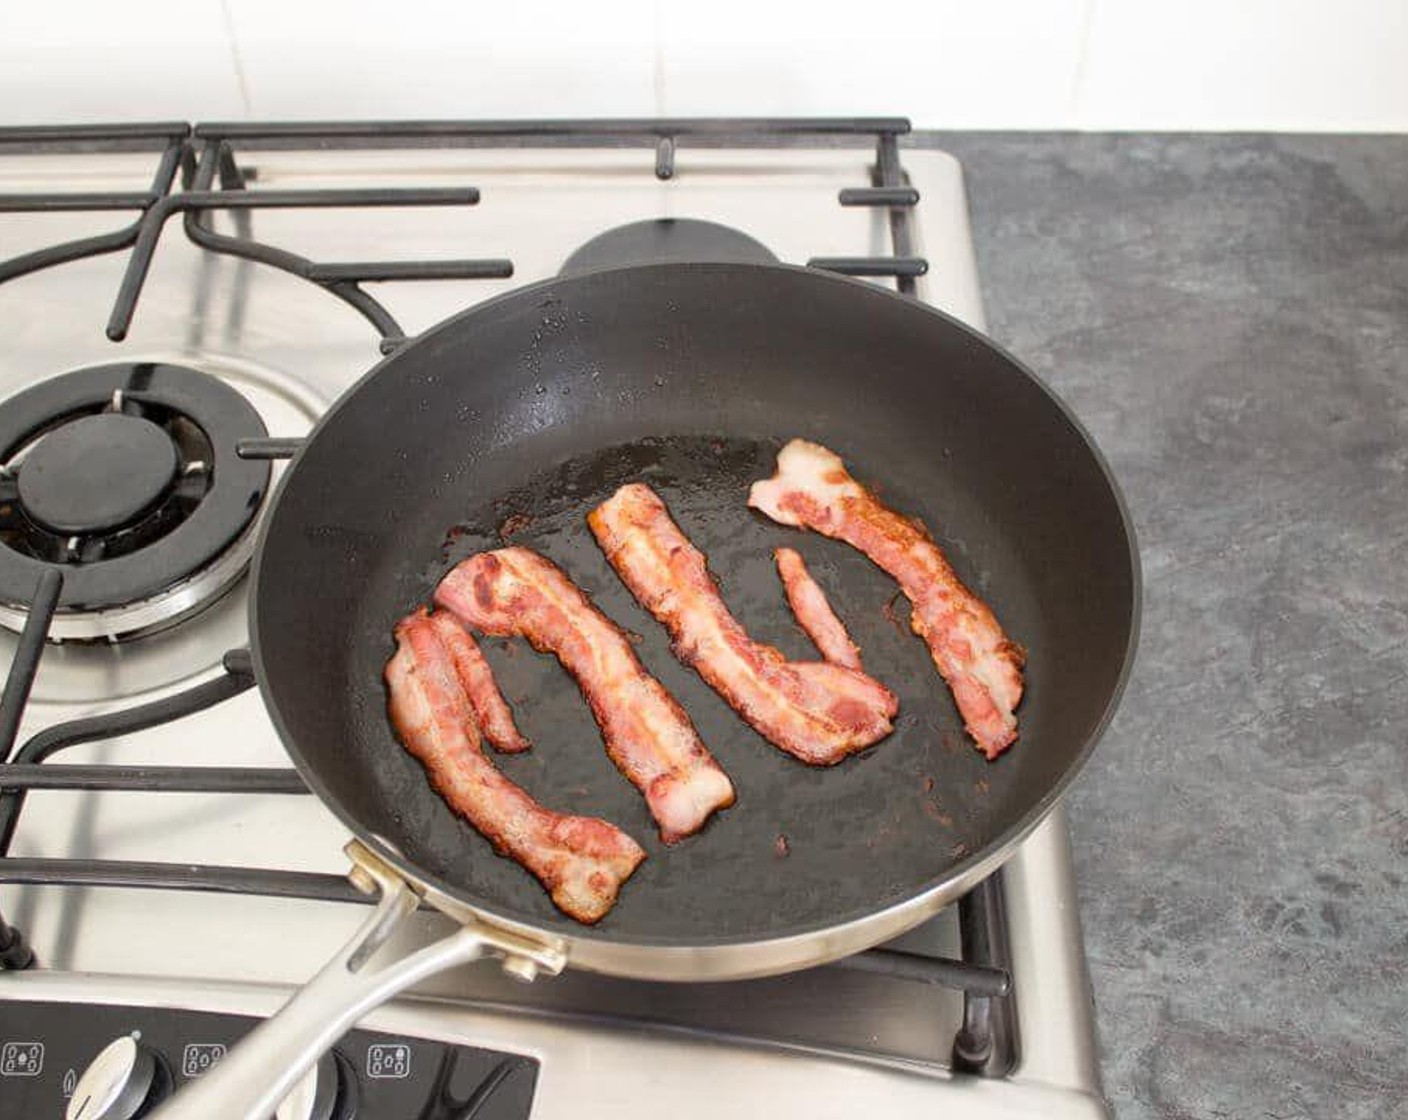 step 2 Next, lay in the Wright® Brand Smoked Bacon (4 slices) and fry to your liking, turning once to ensure even cooking. Remove the bacon from the pan and set it to one side to keep warm. Keep the pan over medium heat.